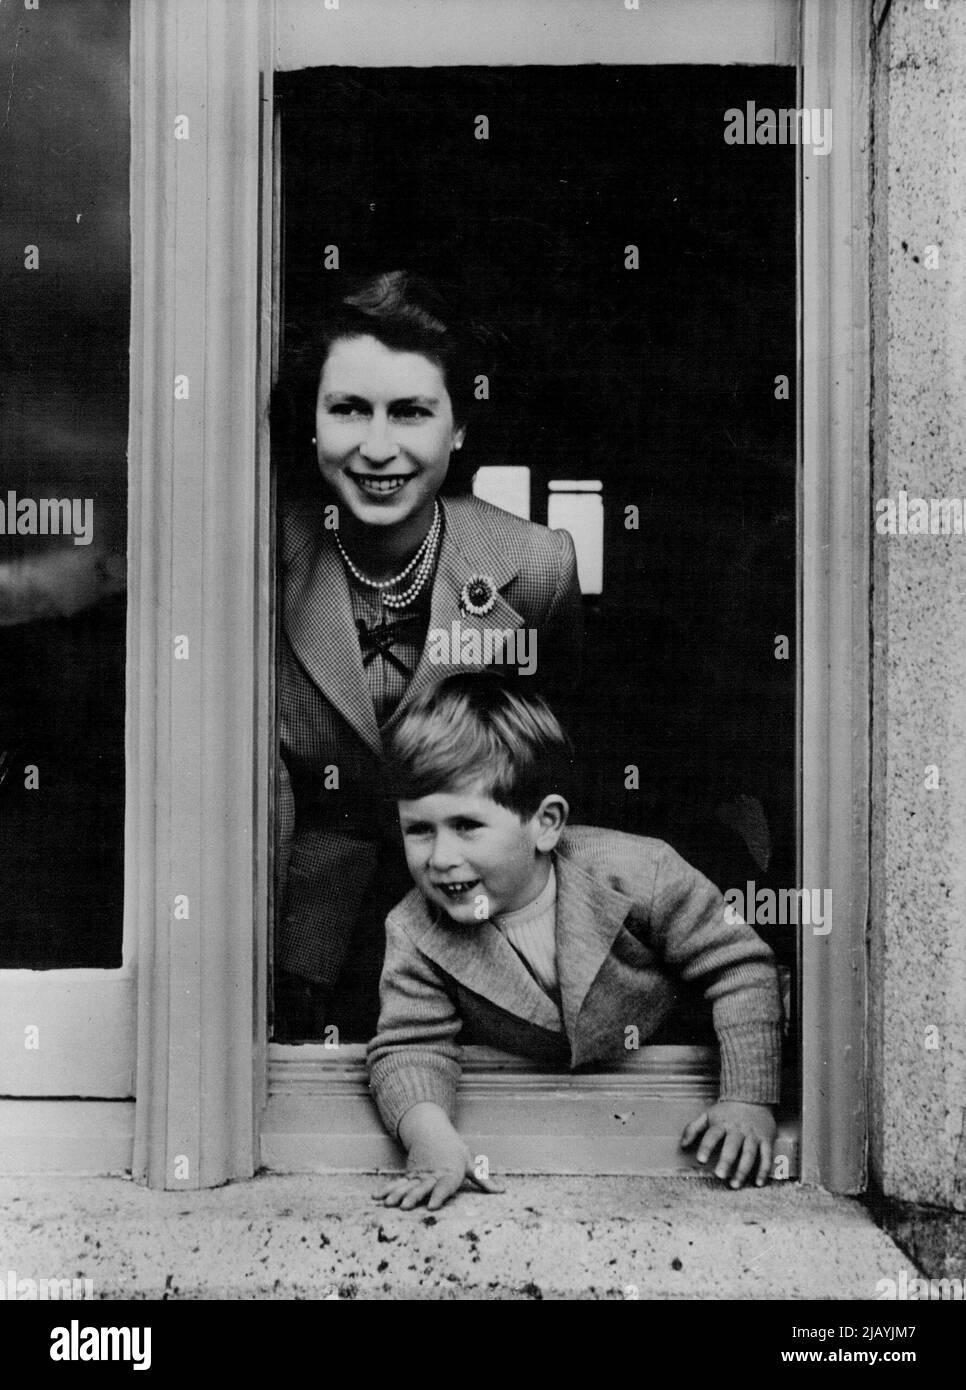 Royal Smiles. The Queen and Prince Charles taken in happy mood on the young Prince's fourth birthday at Balmoral Castle on November 14. November 23, 1952. (Photo by Camera Press Ltd.). Stock Photo